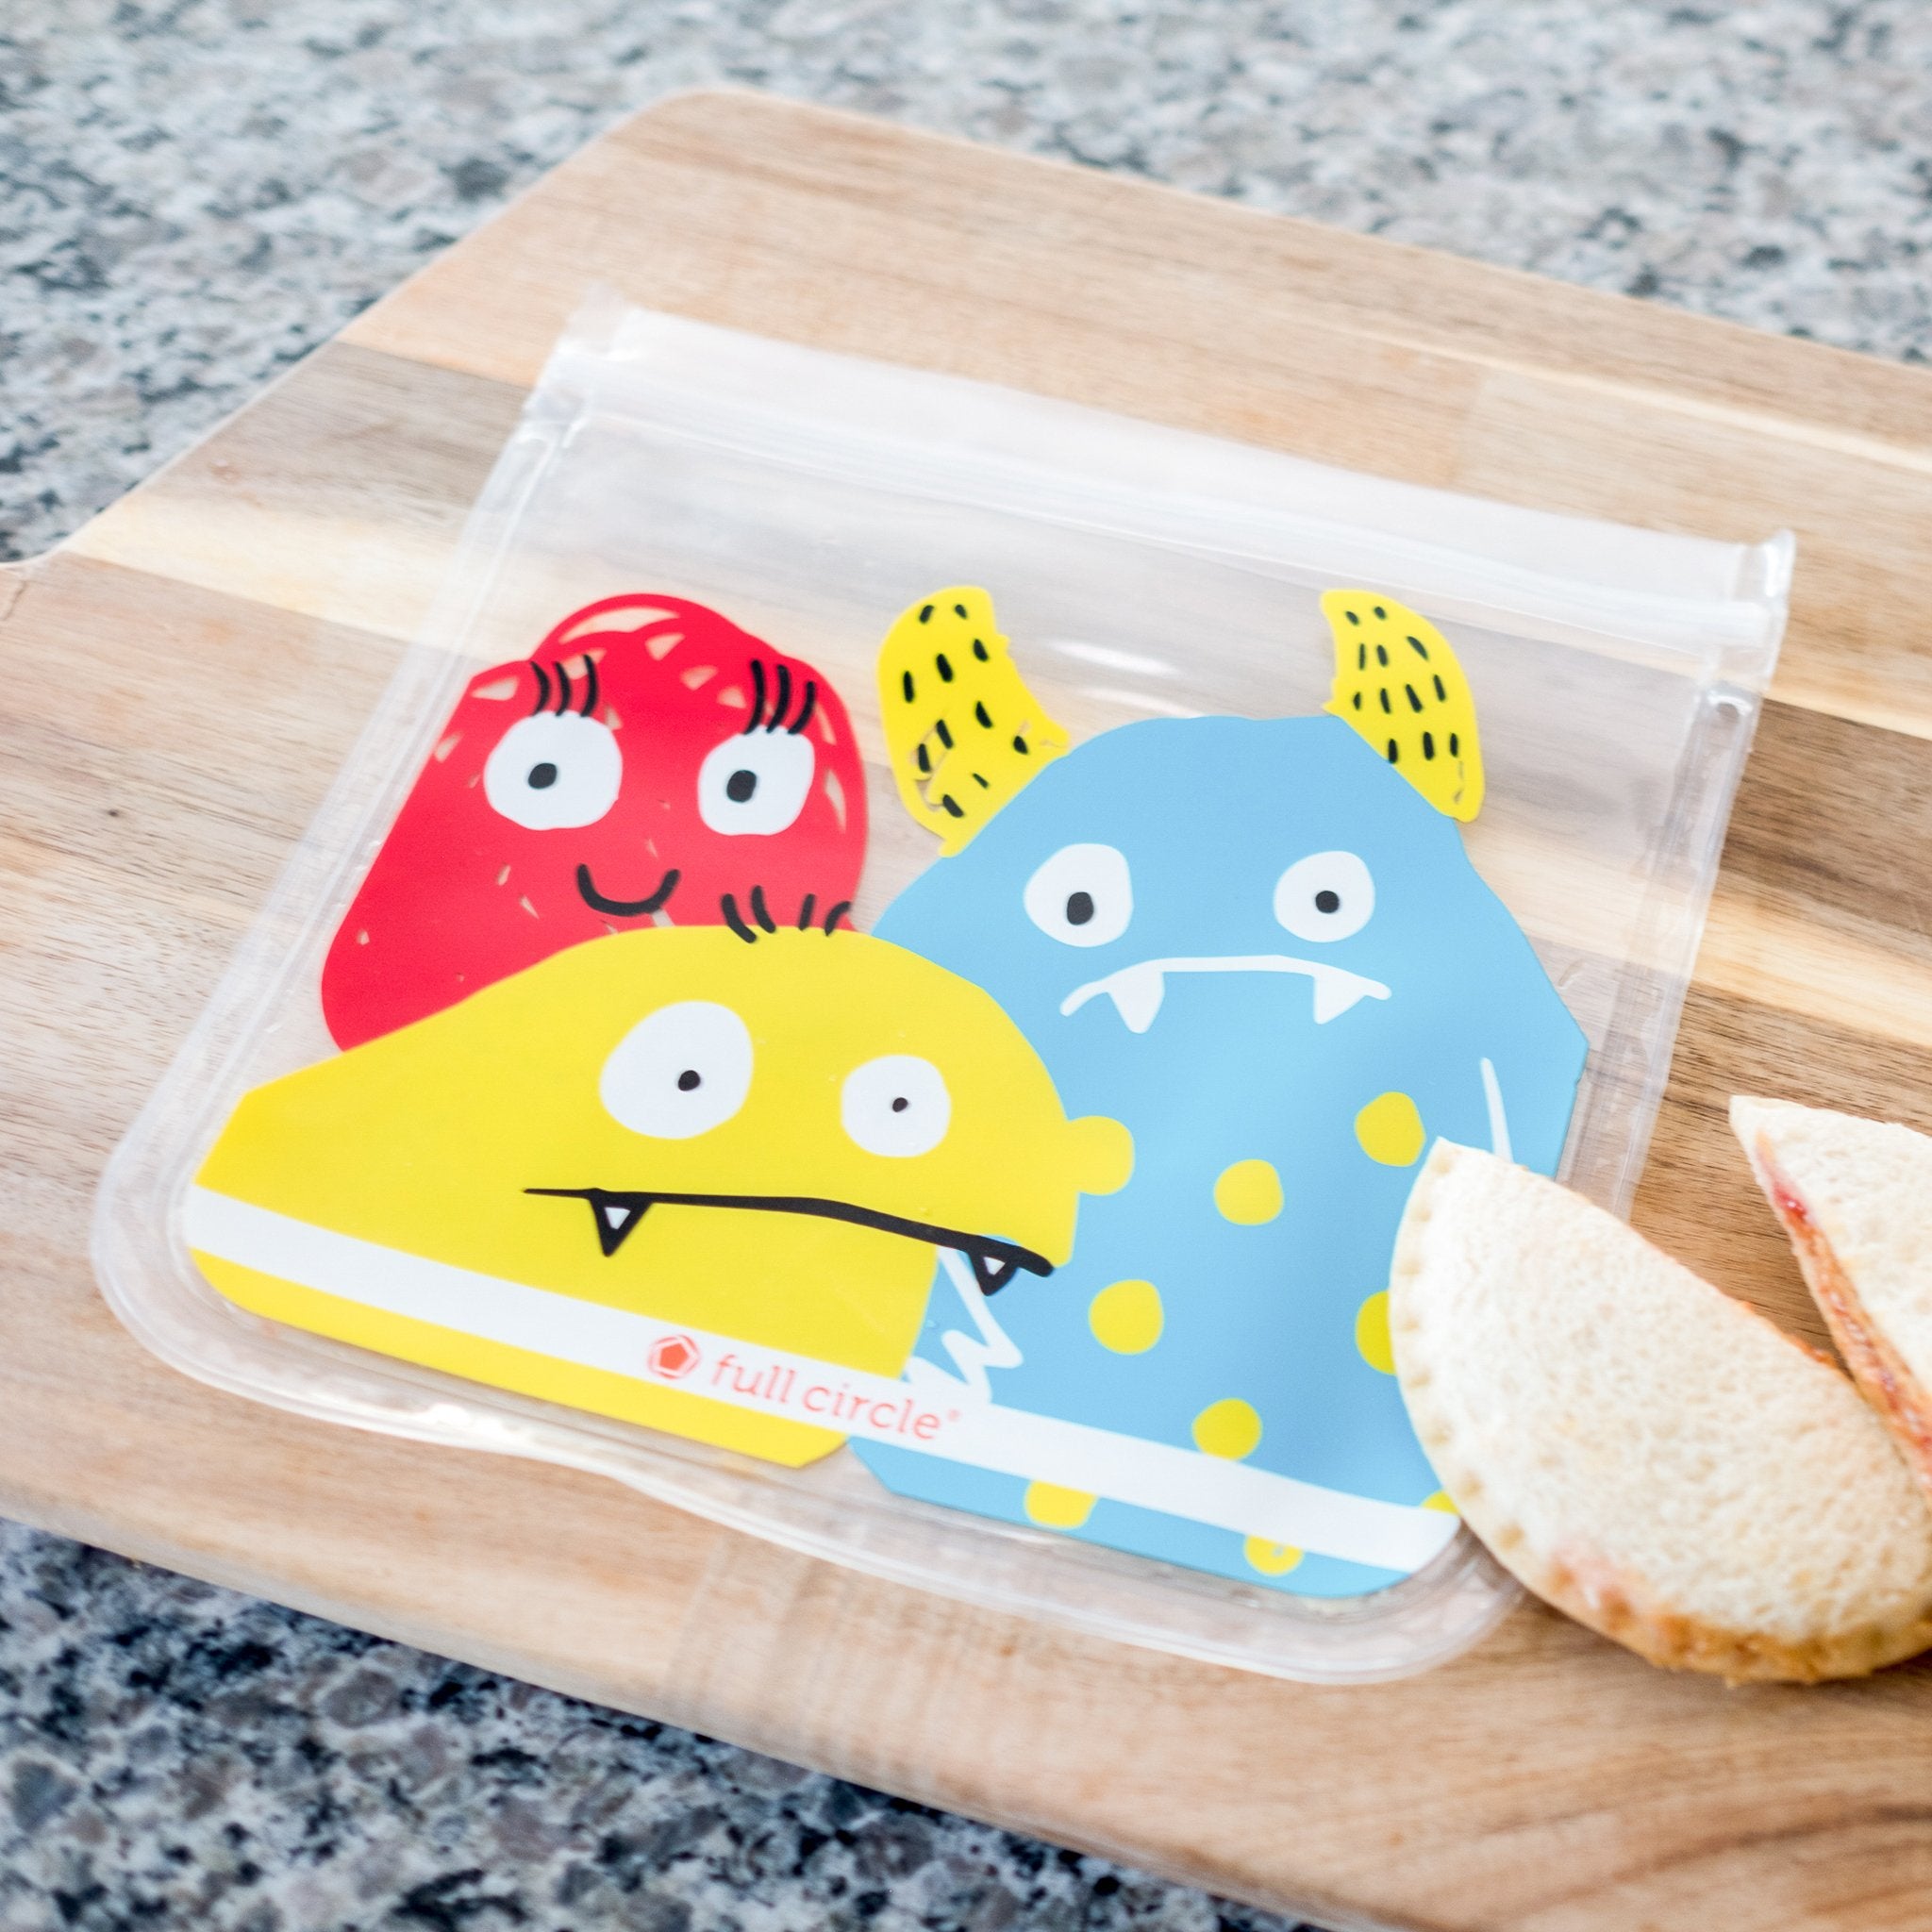 Unicore Snack Bags, Reusable KIds Snack Bags Unicore, Sandwich Reusable  Bags, Kids Reusable Sandwich Bag, Kids Snack Containers